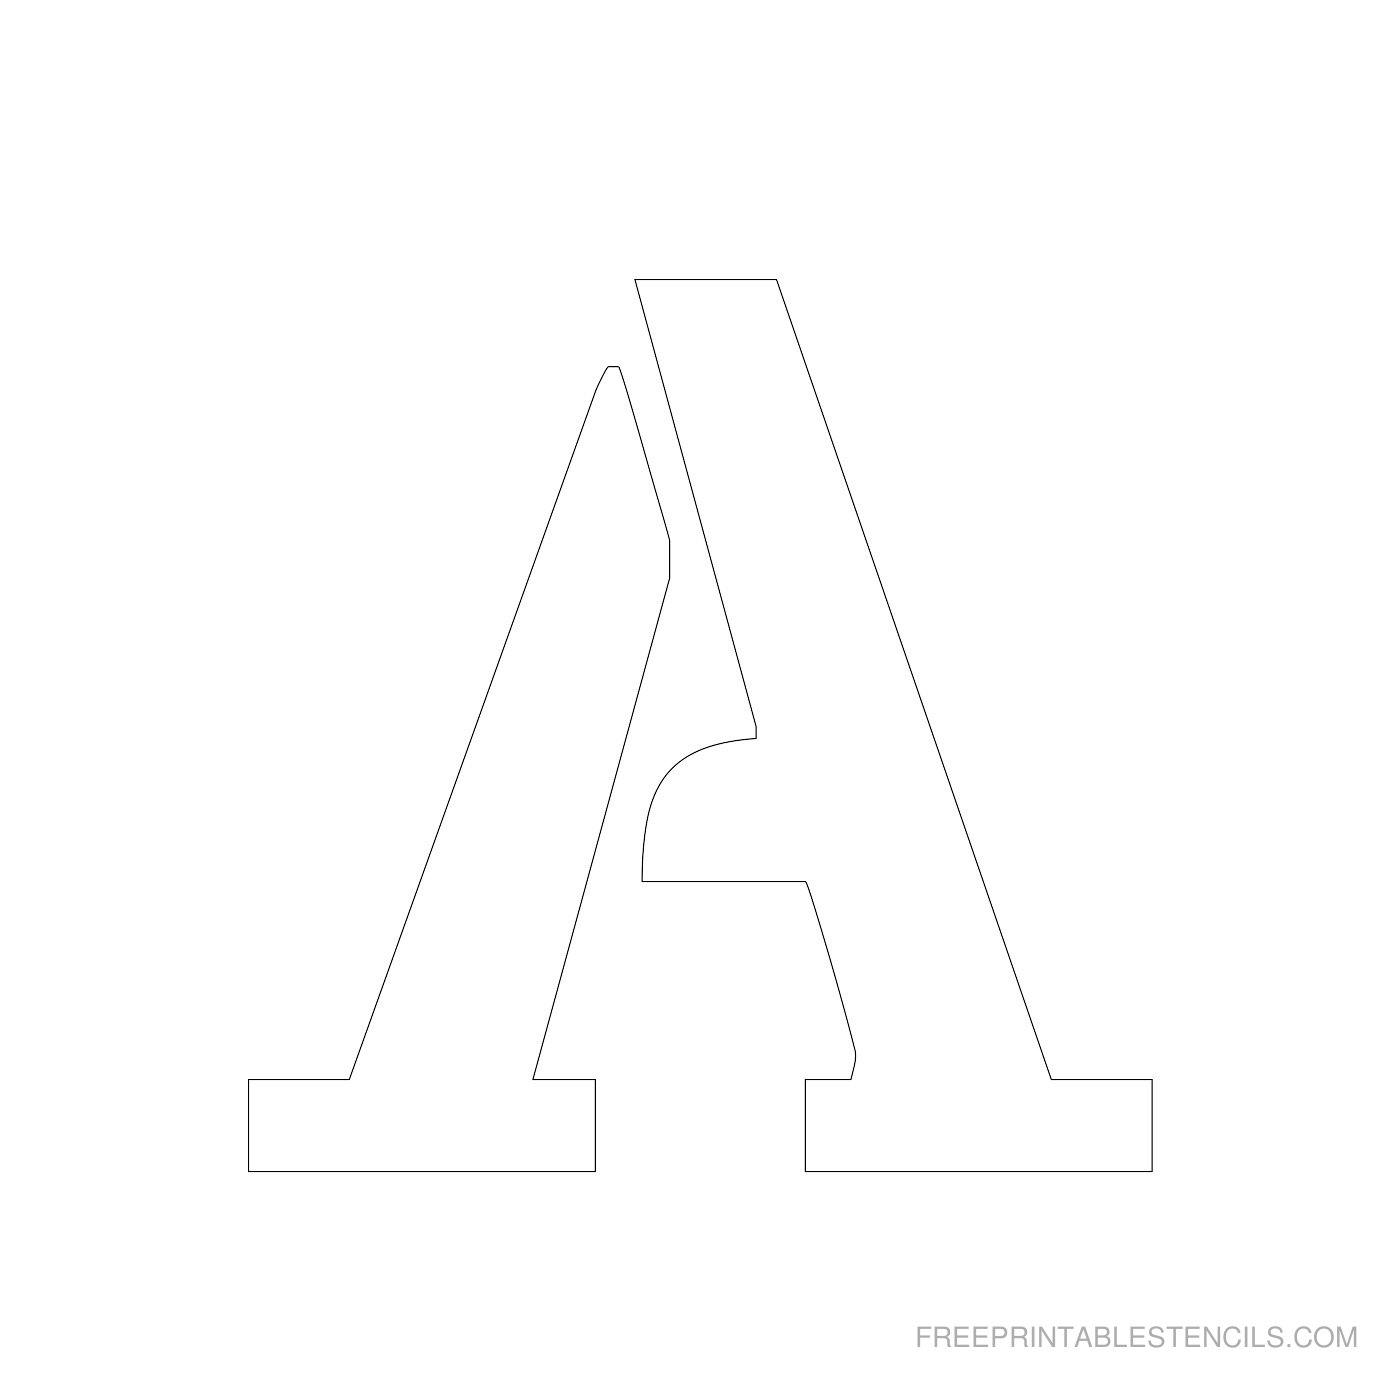 4 Inch Printable Alphabet Letters Templates   Bing images | Crafts 